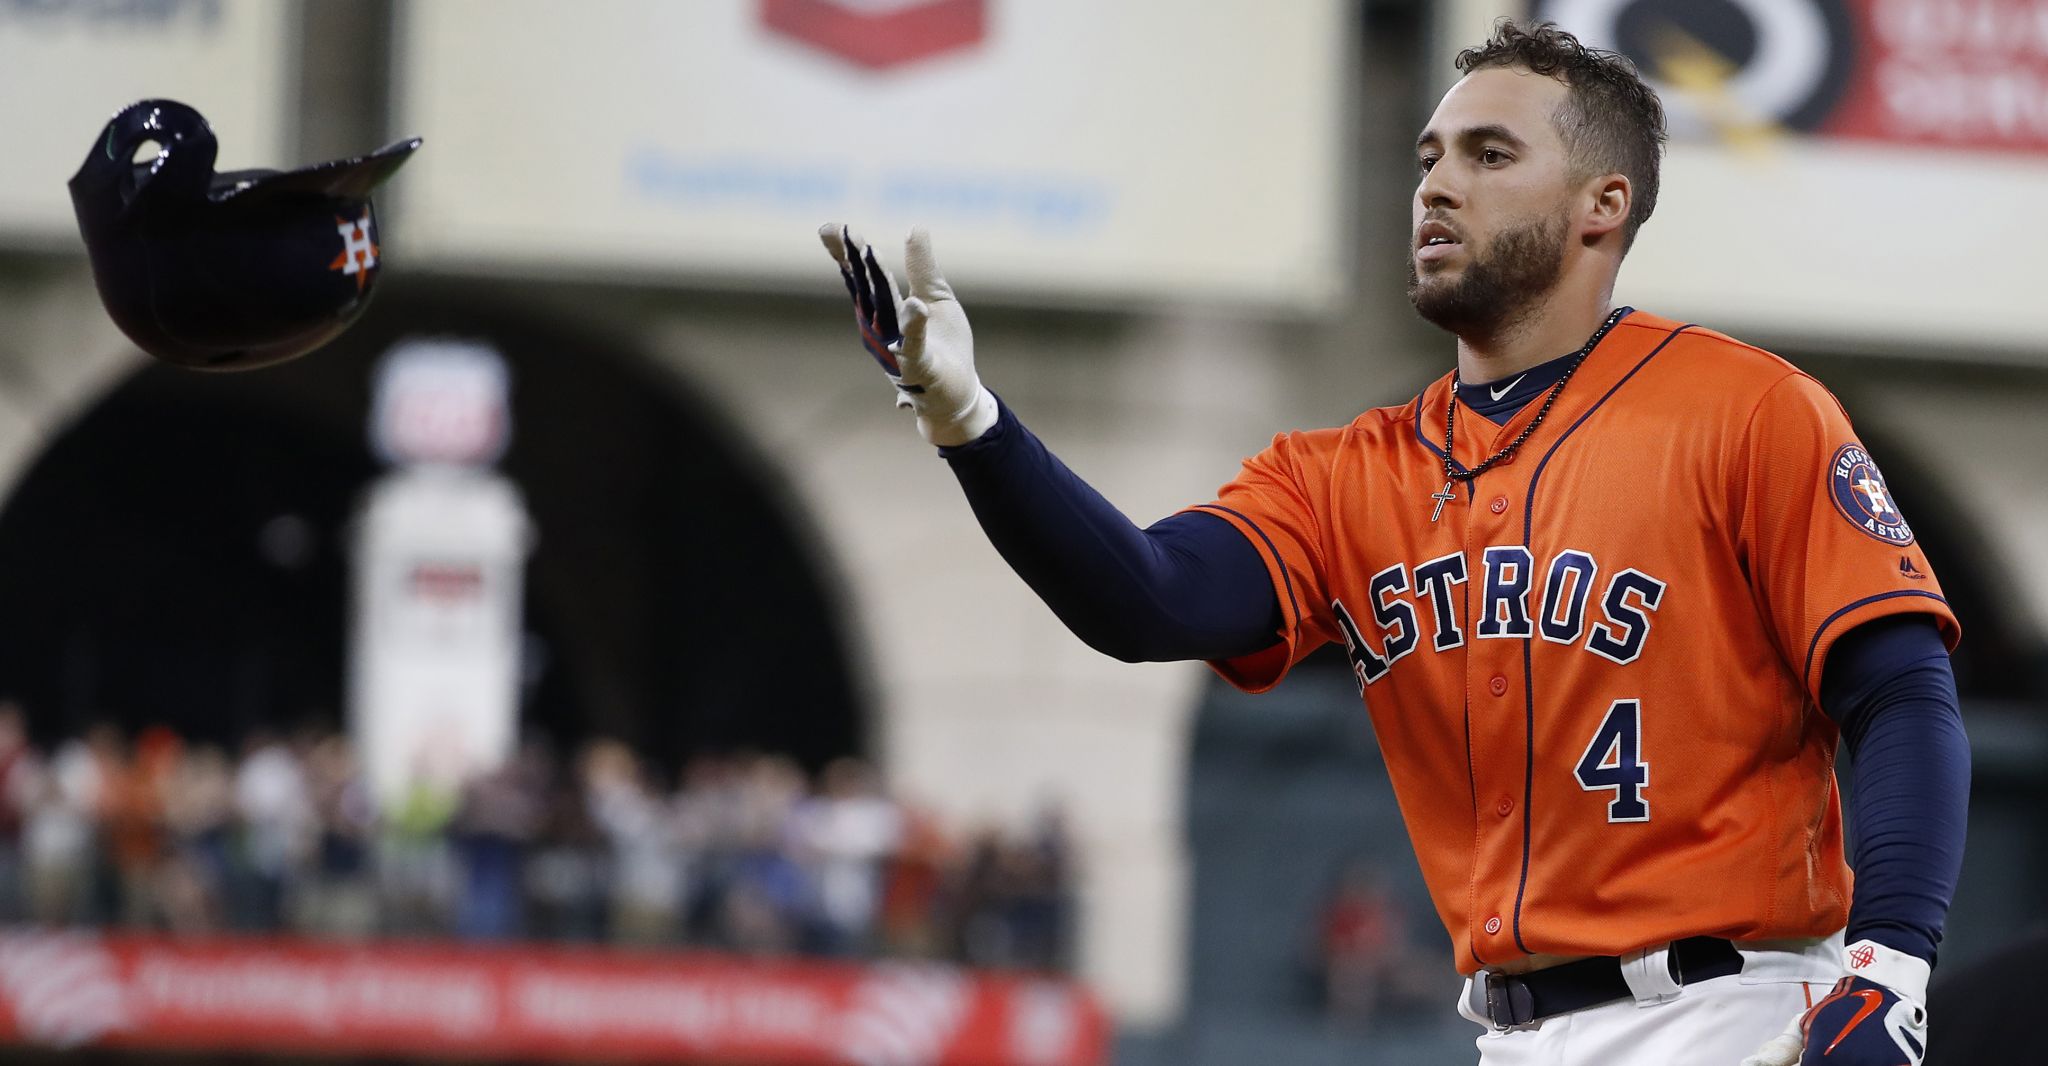 Astros' bats go cold in shutout loss to Royals